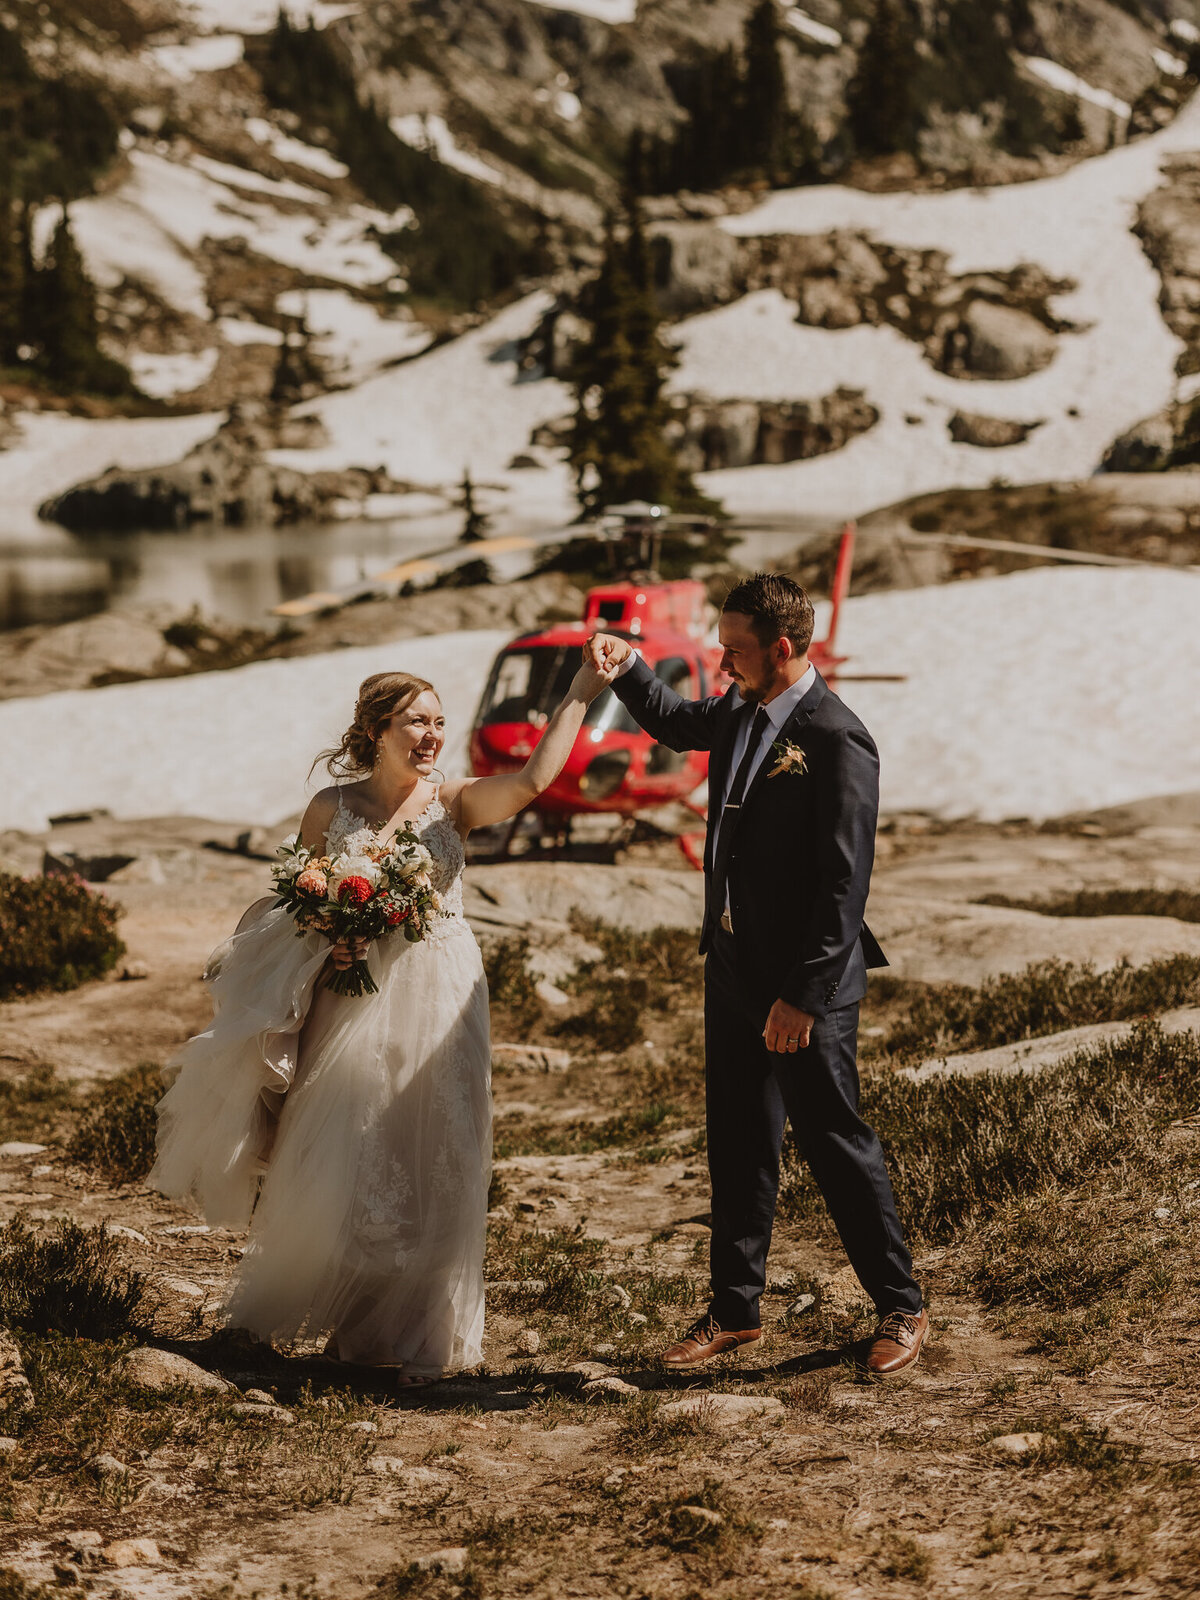 Bride and Groom dancing in front of helicopter